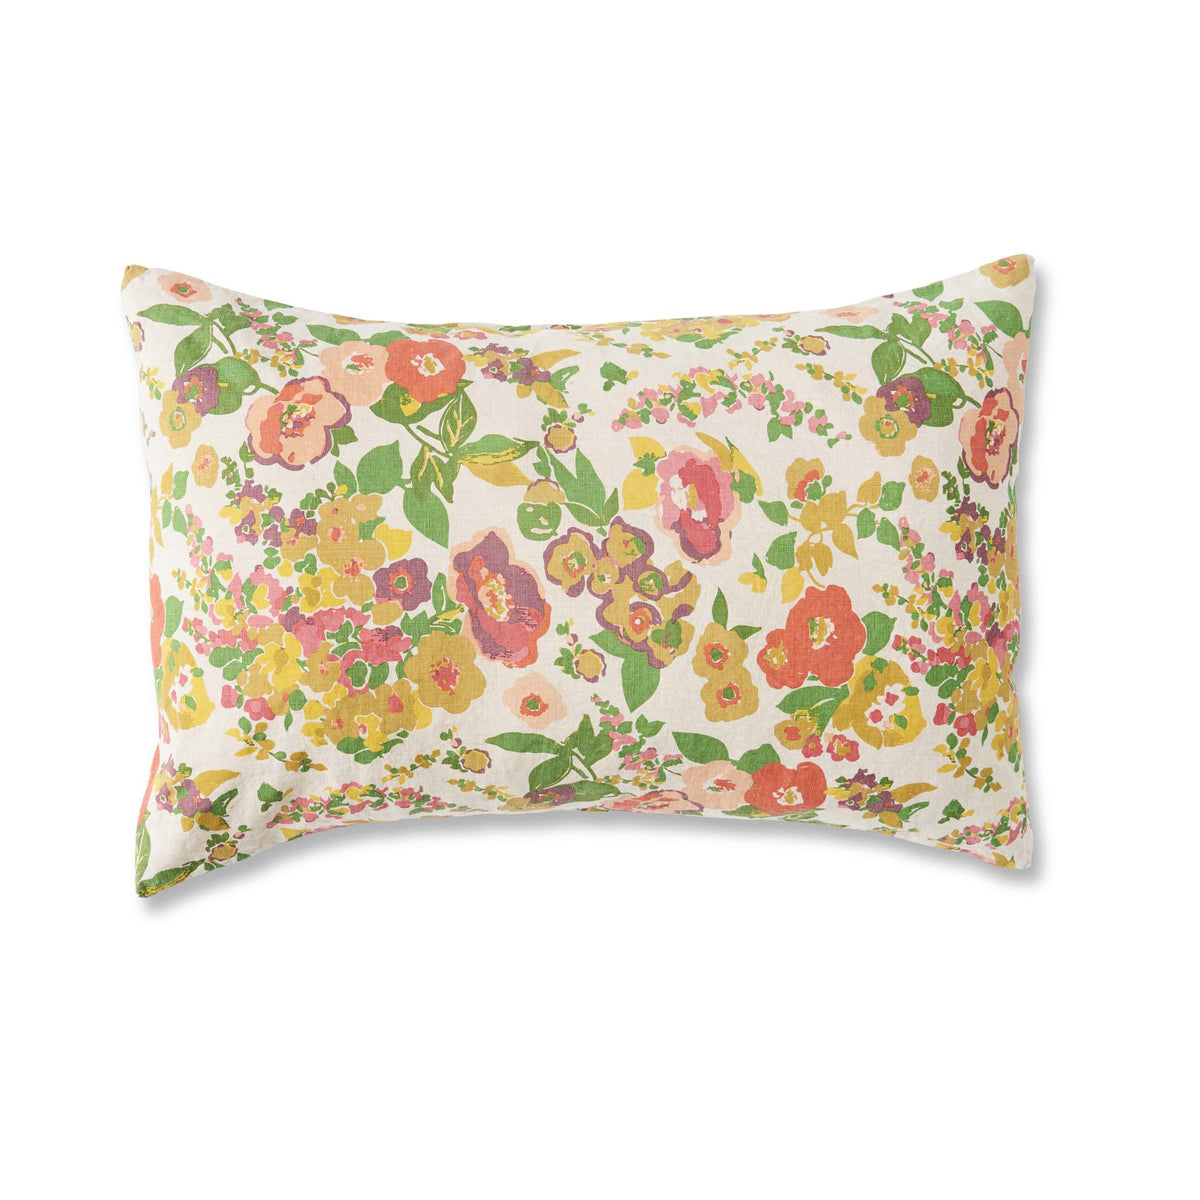 Society of wanderers Harriet Floral Pillowcase Sets